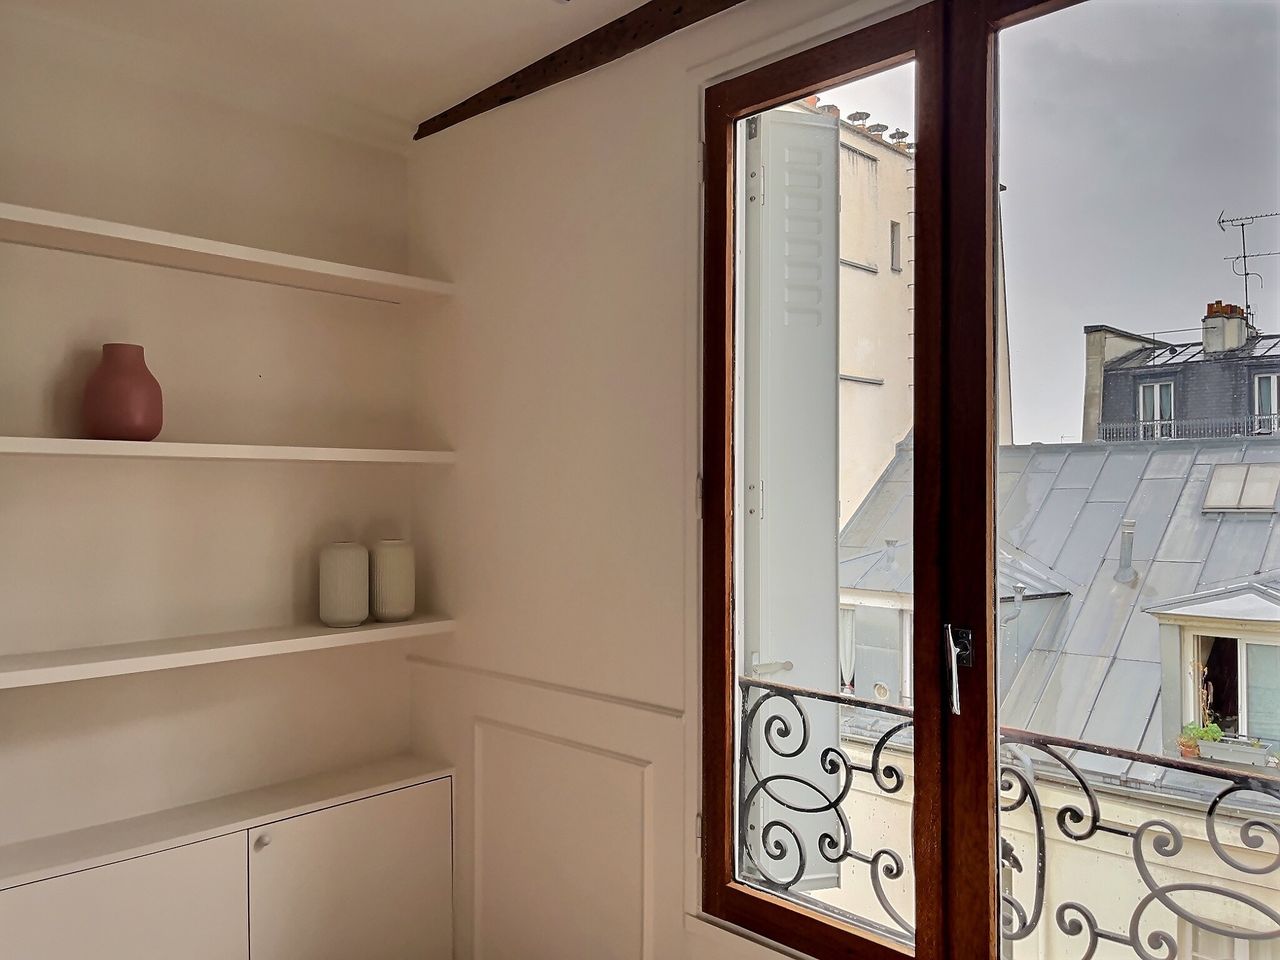 Charming Three-Room Apartment in the Heart of Beaubourg and Le Marais